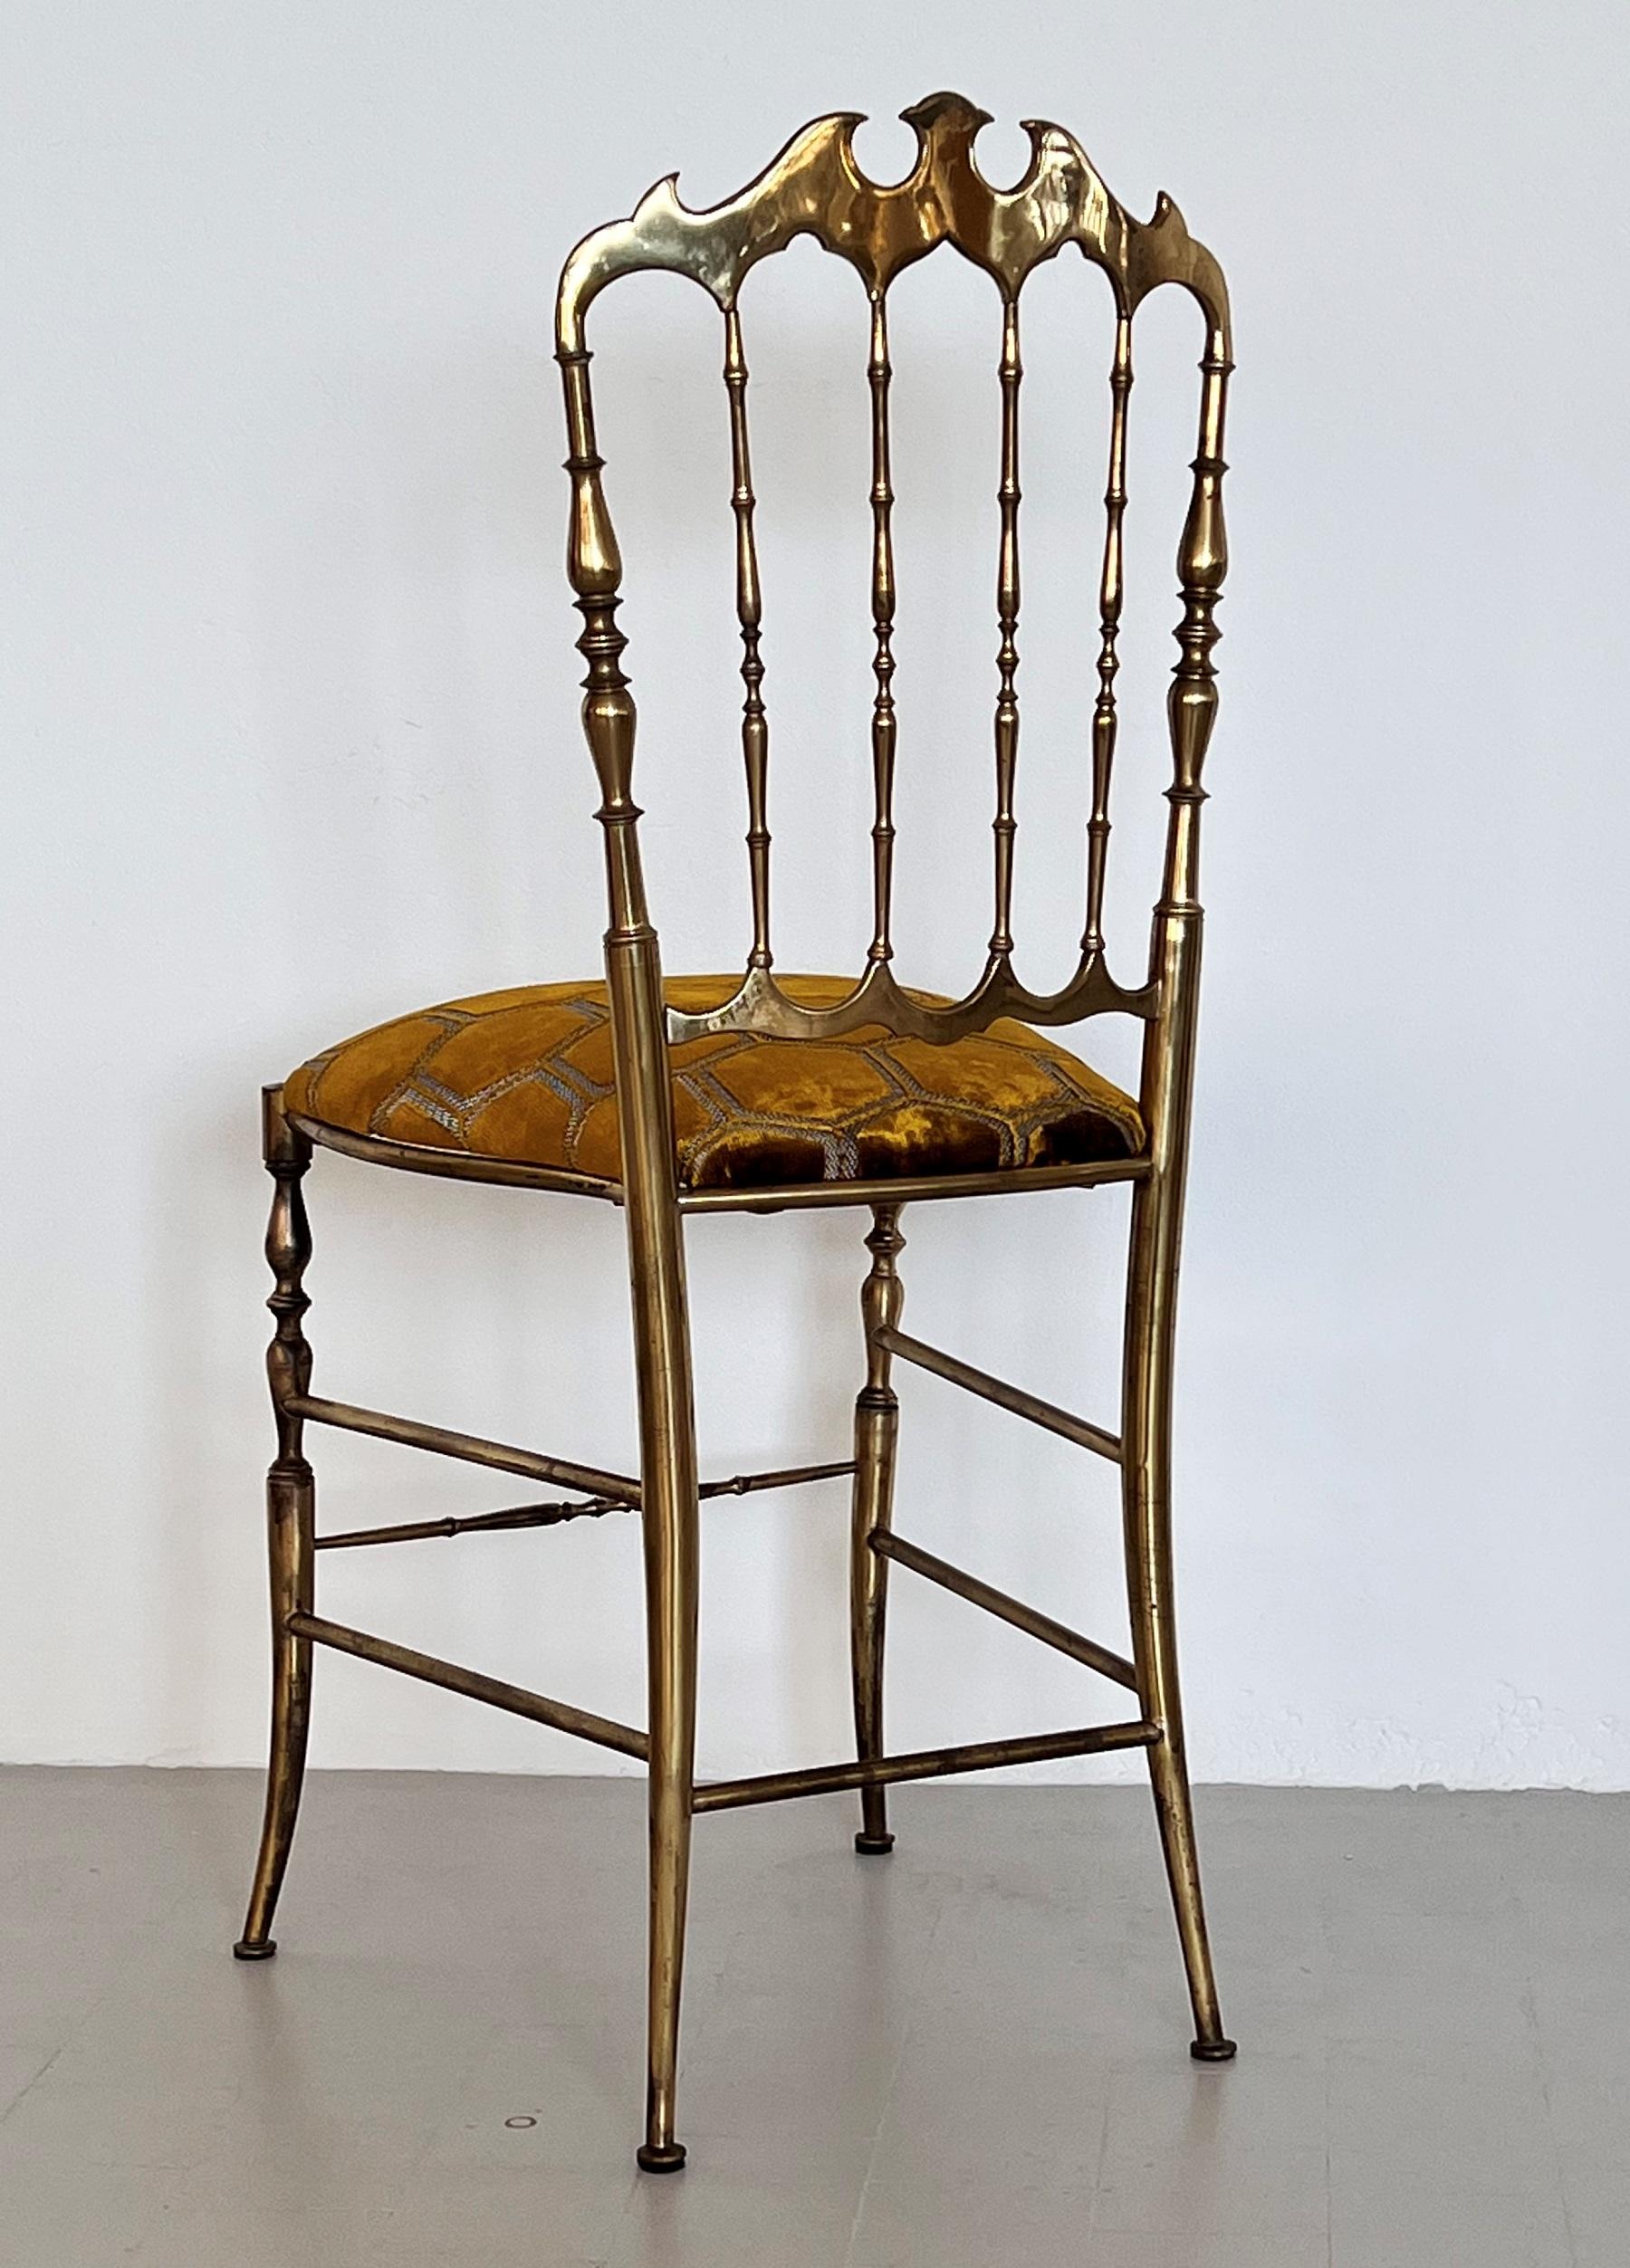 Italian Mid-Century Chiavari Chair in Full Brass with New Upholstery, 1970s For Sale 1